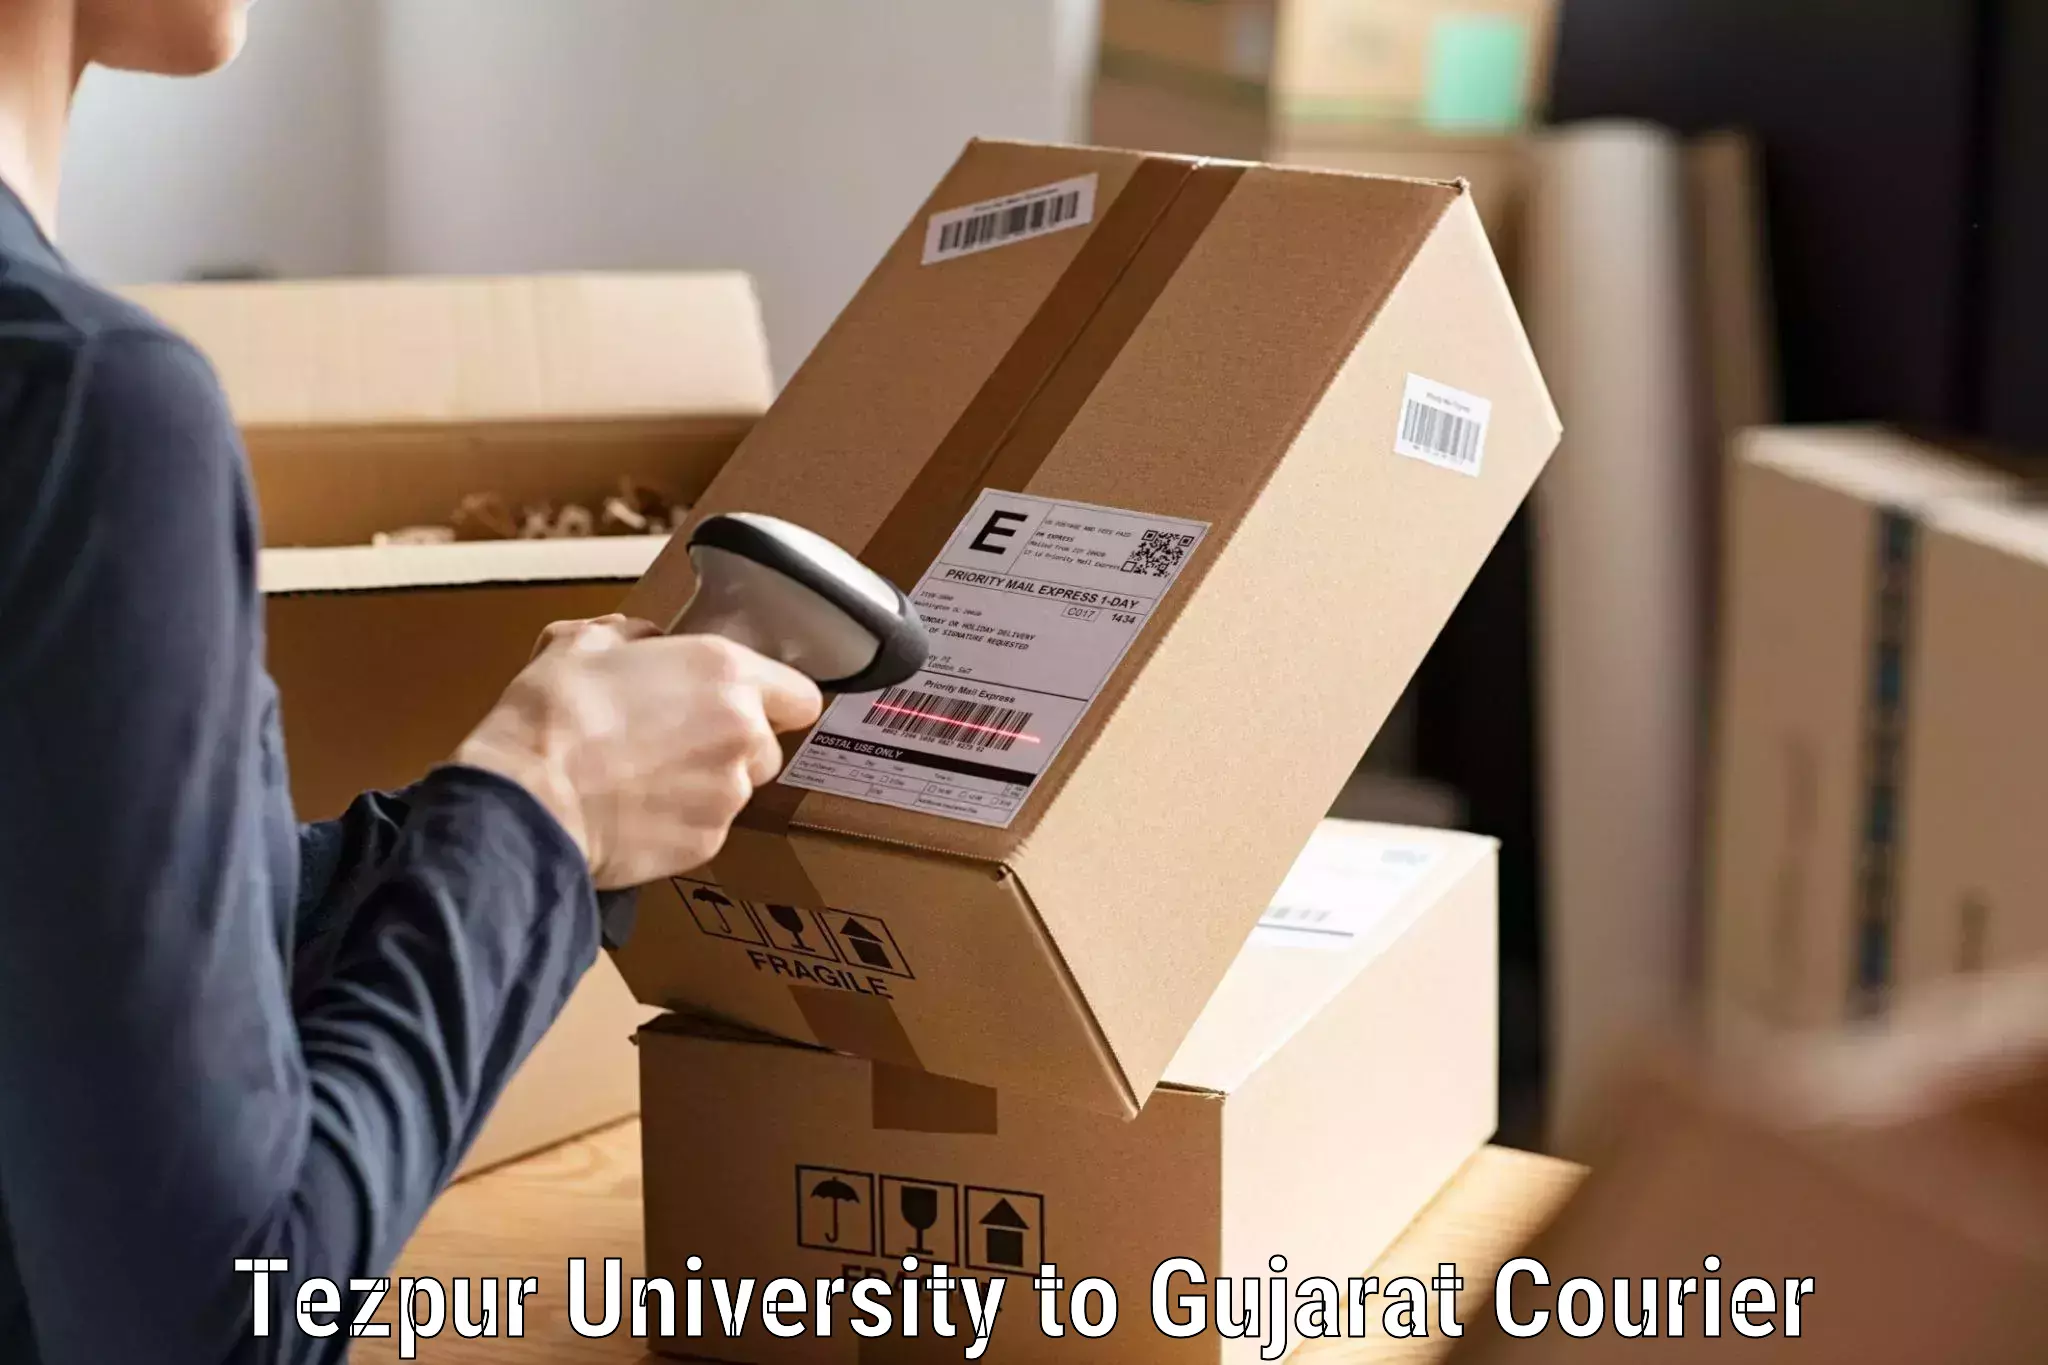 Global courier networks in Tezpur University to Ahwa